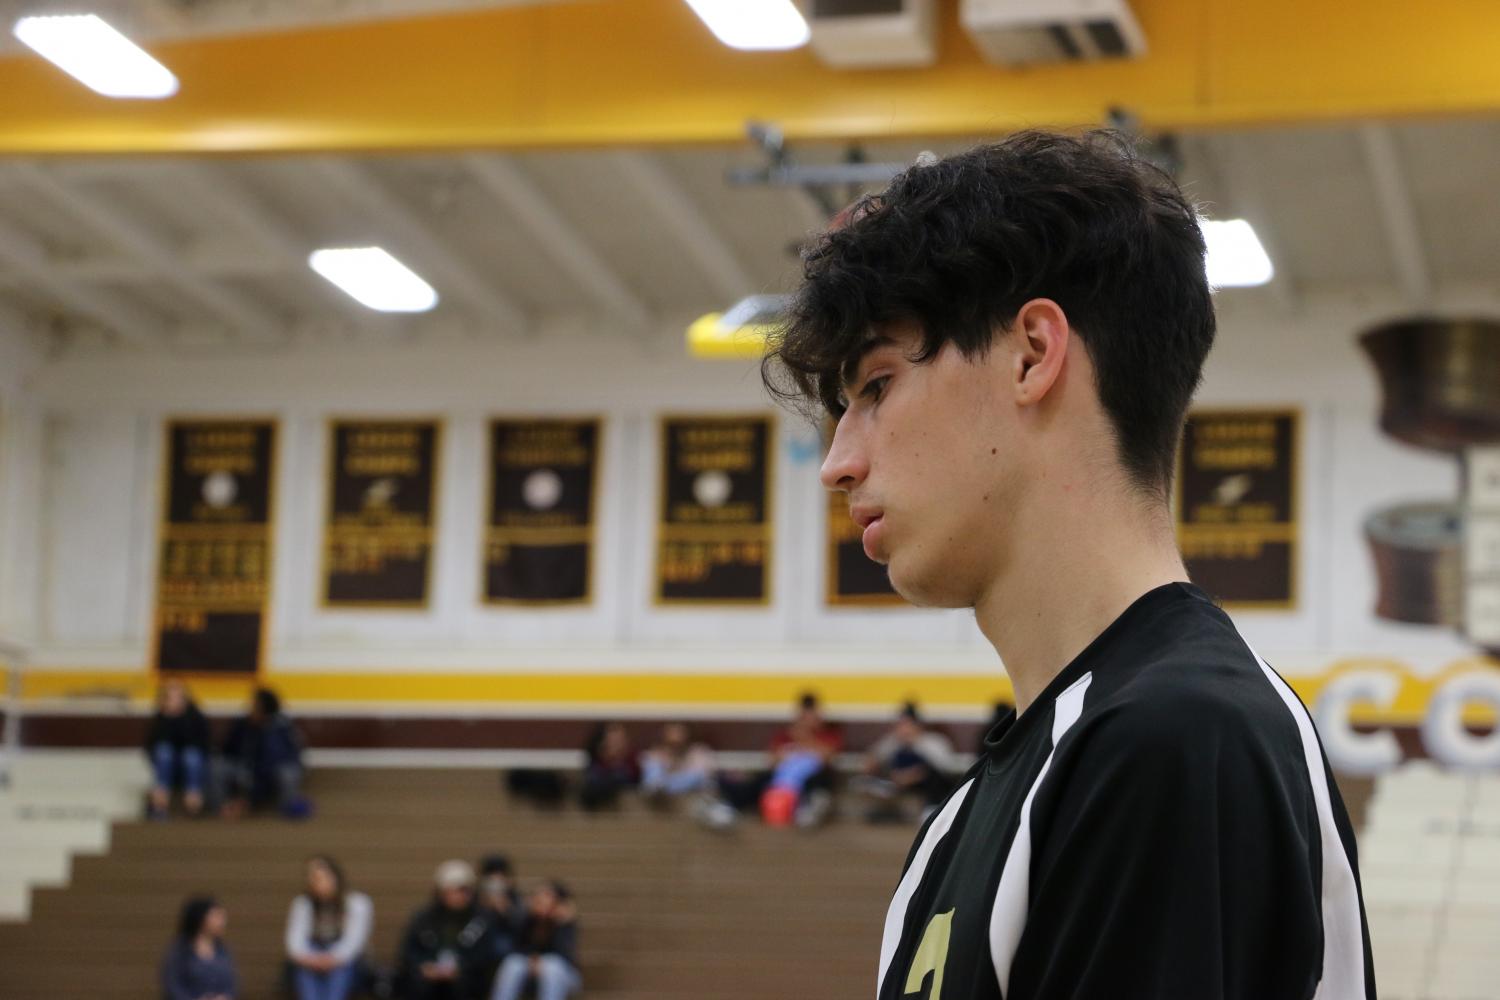 Boys+volleyball+middle+hitter%2C+Andrew+Partida%2C+mourns+as+he+realizes+that+his+volleyball+season+has+concluded.I+have+mixed+feelings+because+we+made+it+to+CIF+%2Cwhich+made+me+excited+but%2C+we+didnt+go+as+far+as+expected+expressed+Andrew+Partida.+If+boys+volleyball+would+of+won+%2C+they+would+of+went+on+a+boat+ride+to+play+in+Catalina+Island+